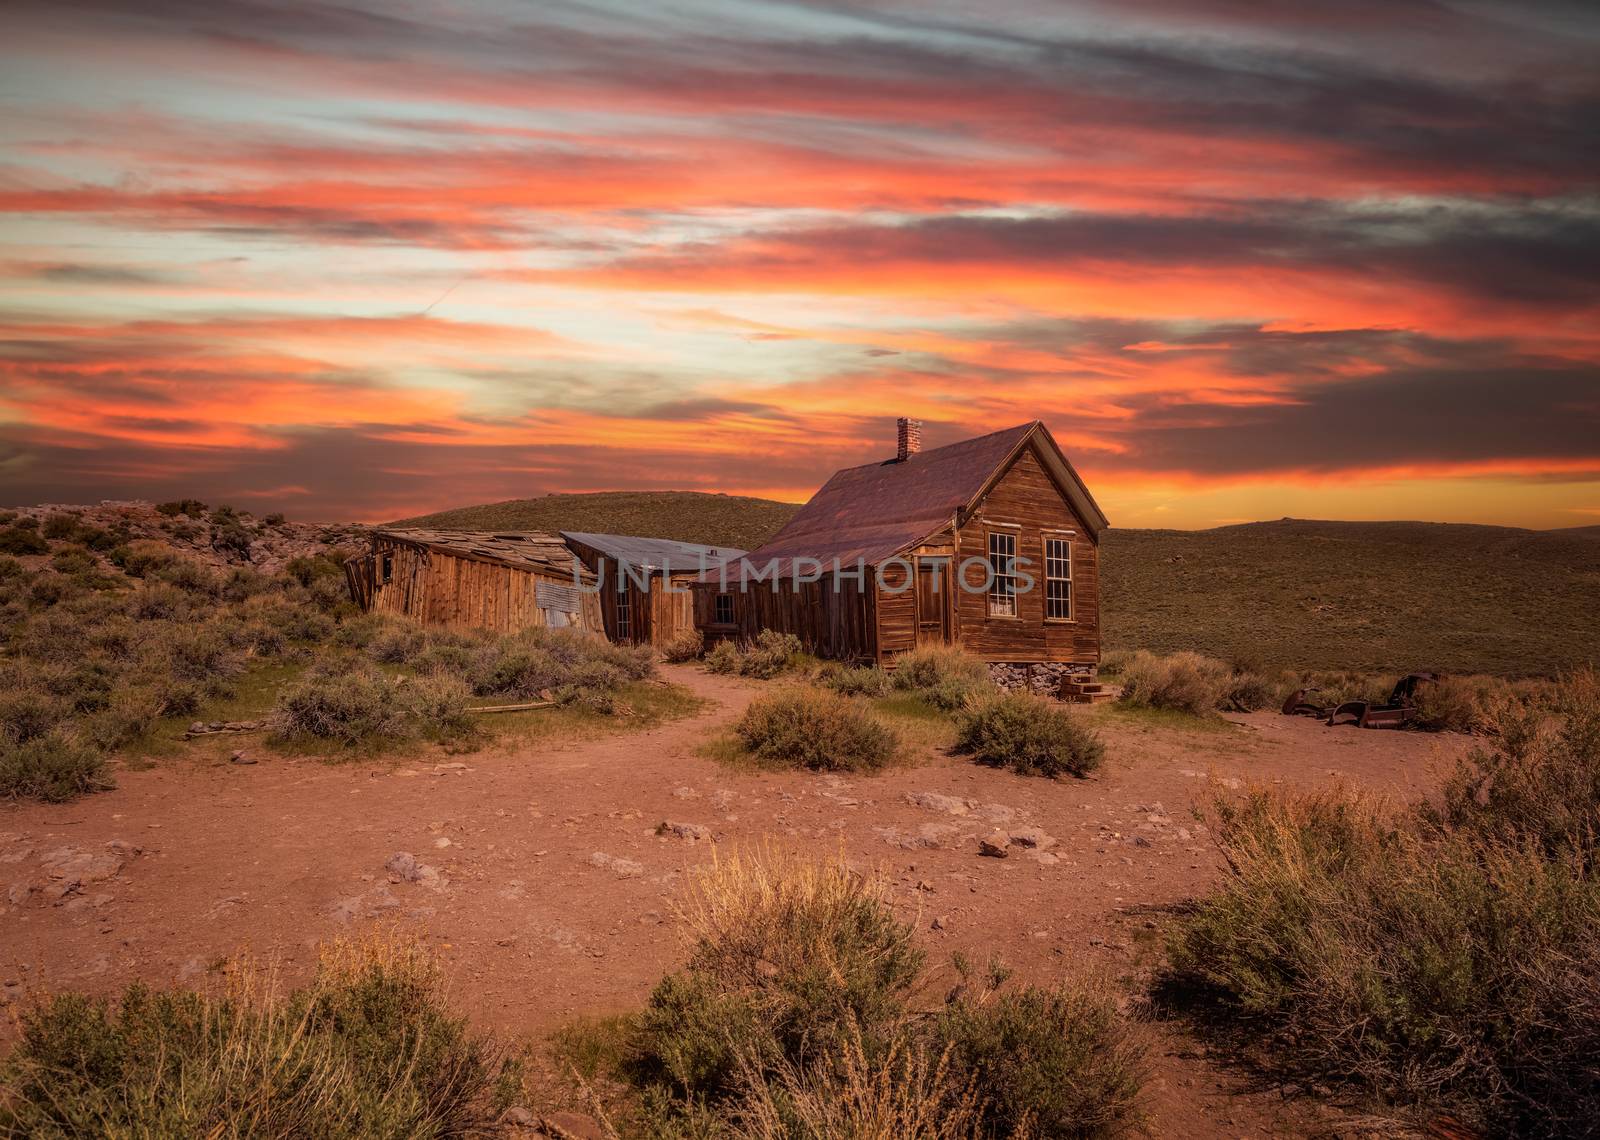 Sunset over Bodie ghost town in California by nickfox